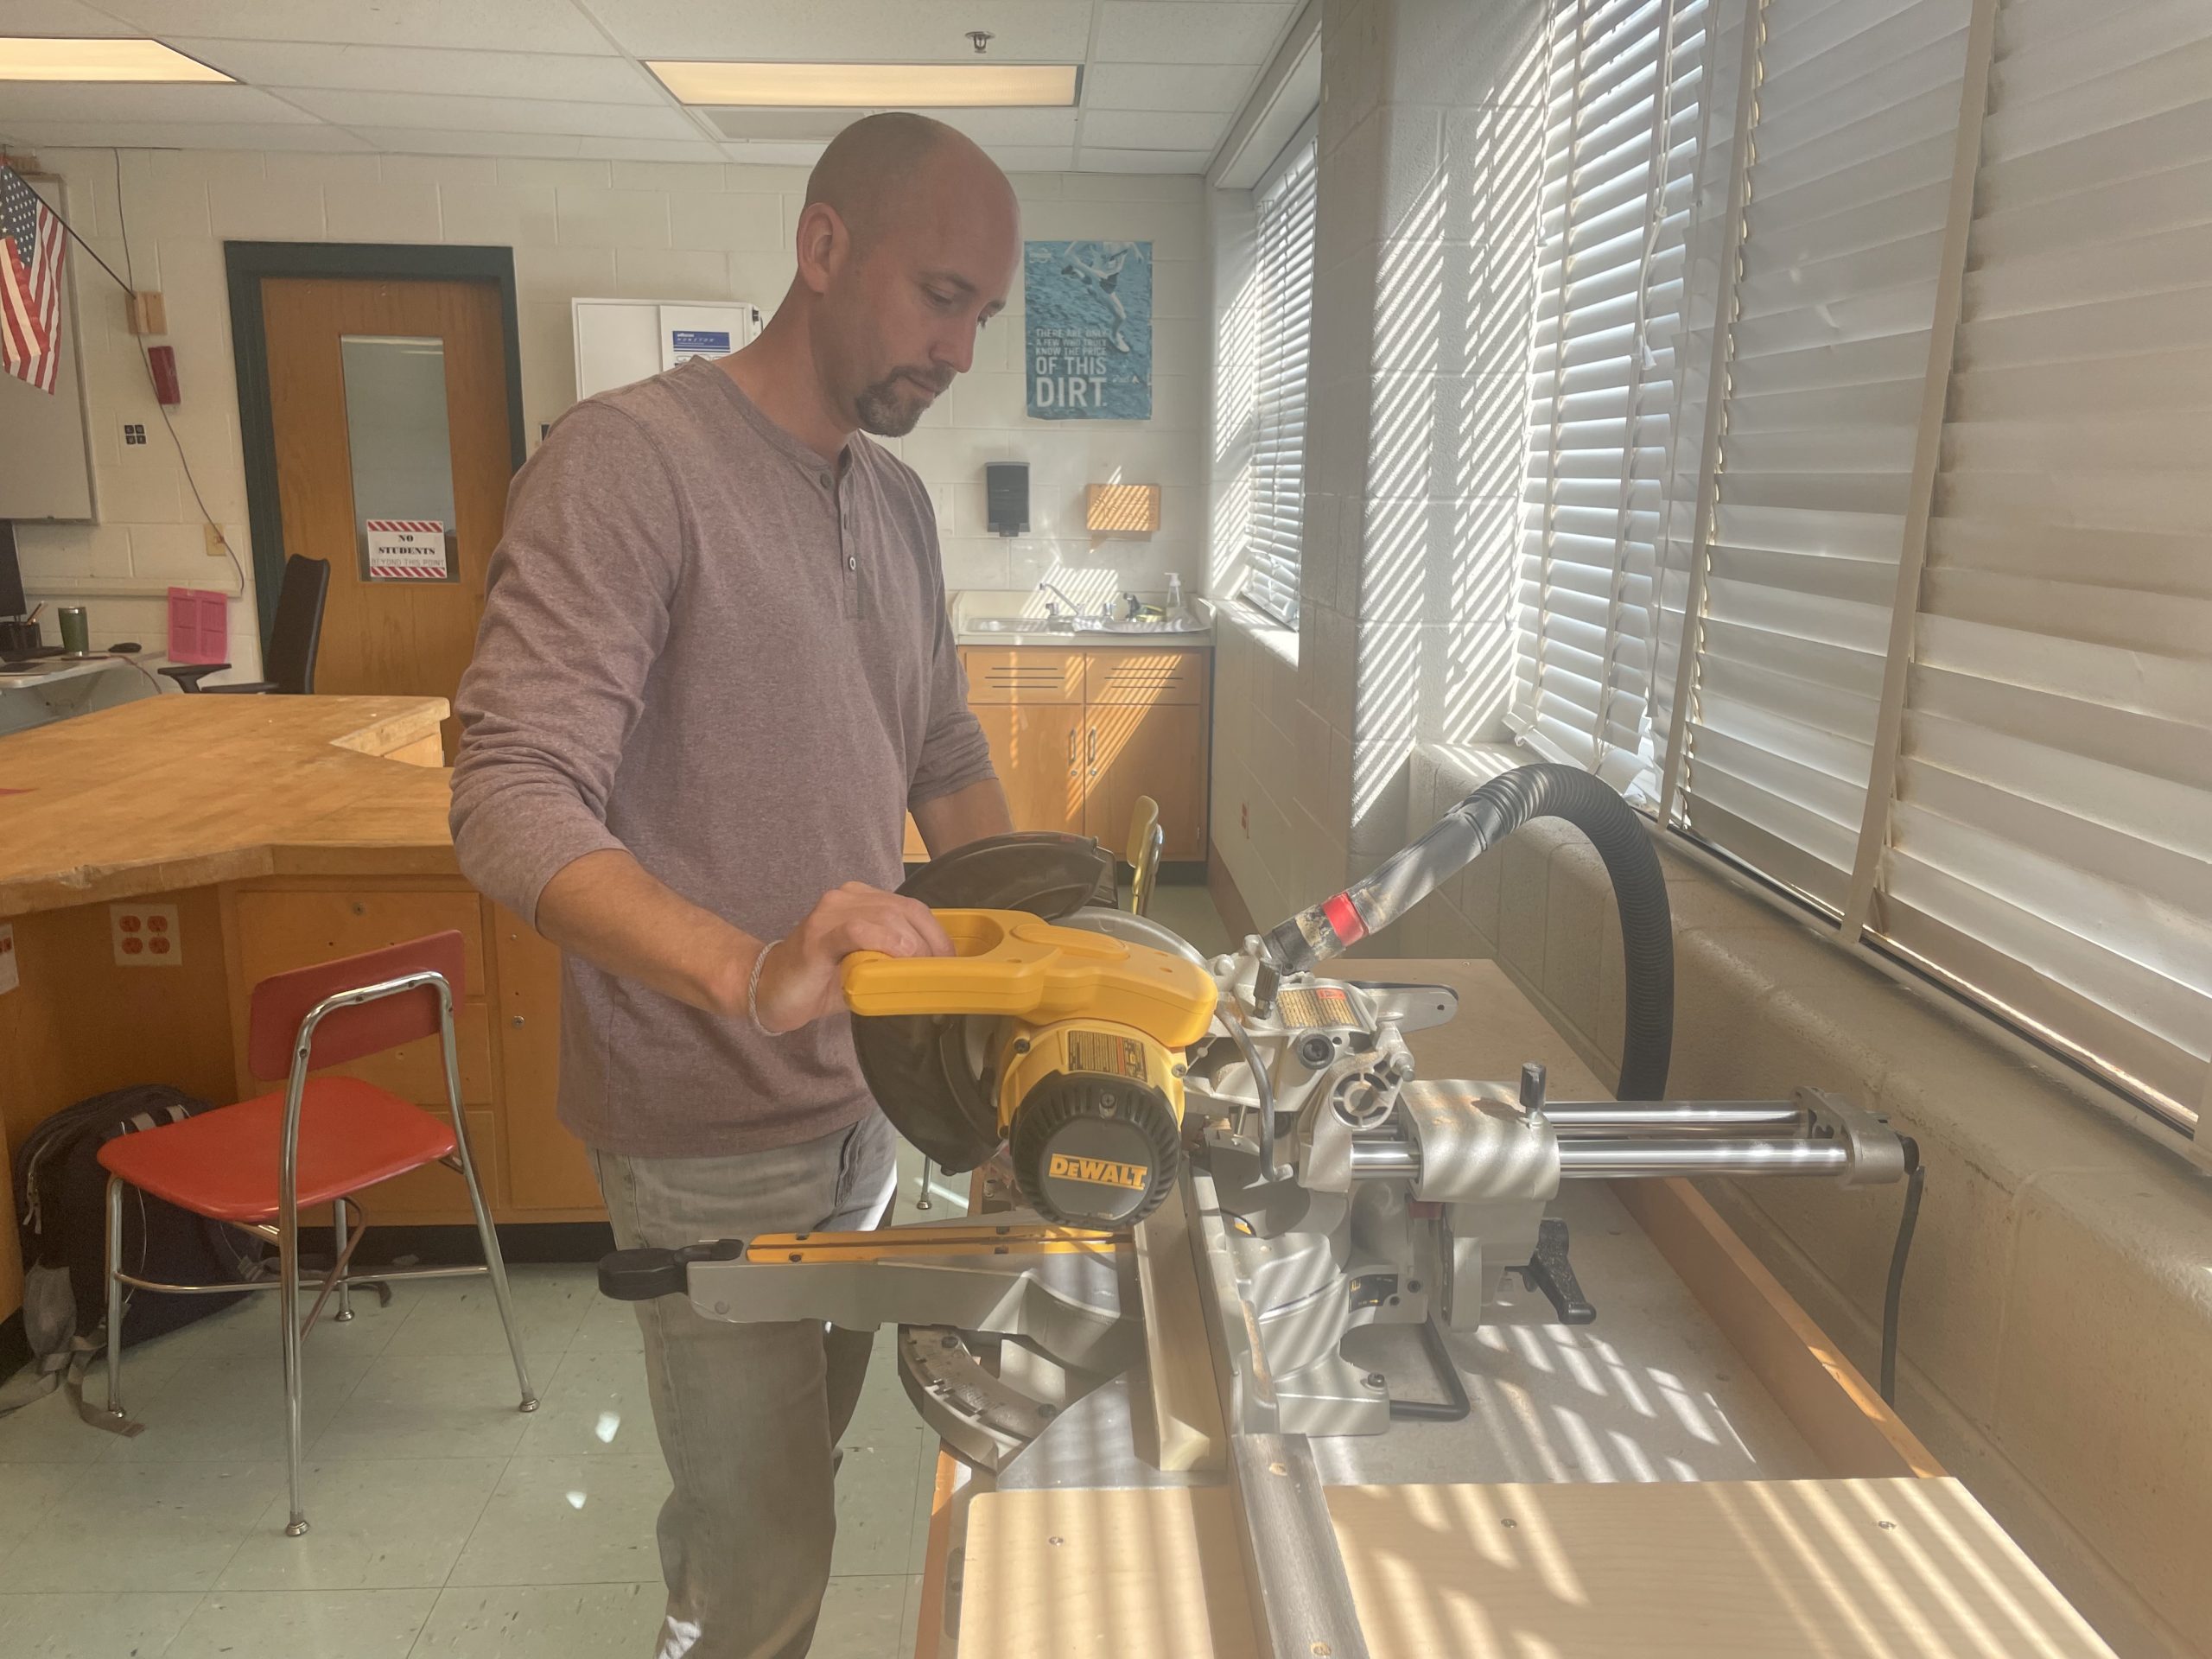 Technology teacher Mike Bauer cuts wood into blocks for an upcoming project using a wood chopper. “We are going to be making cars and racing them down a ramp; should be super fun and I am very excited to get into woodworking with the students, Bauer said.